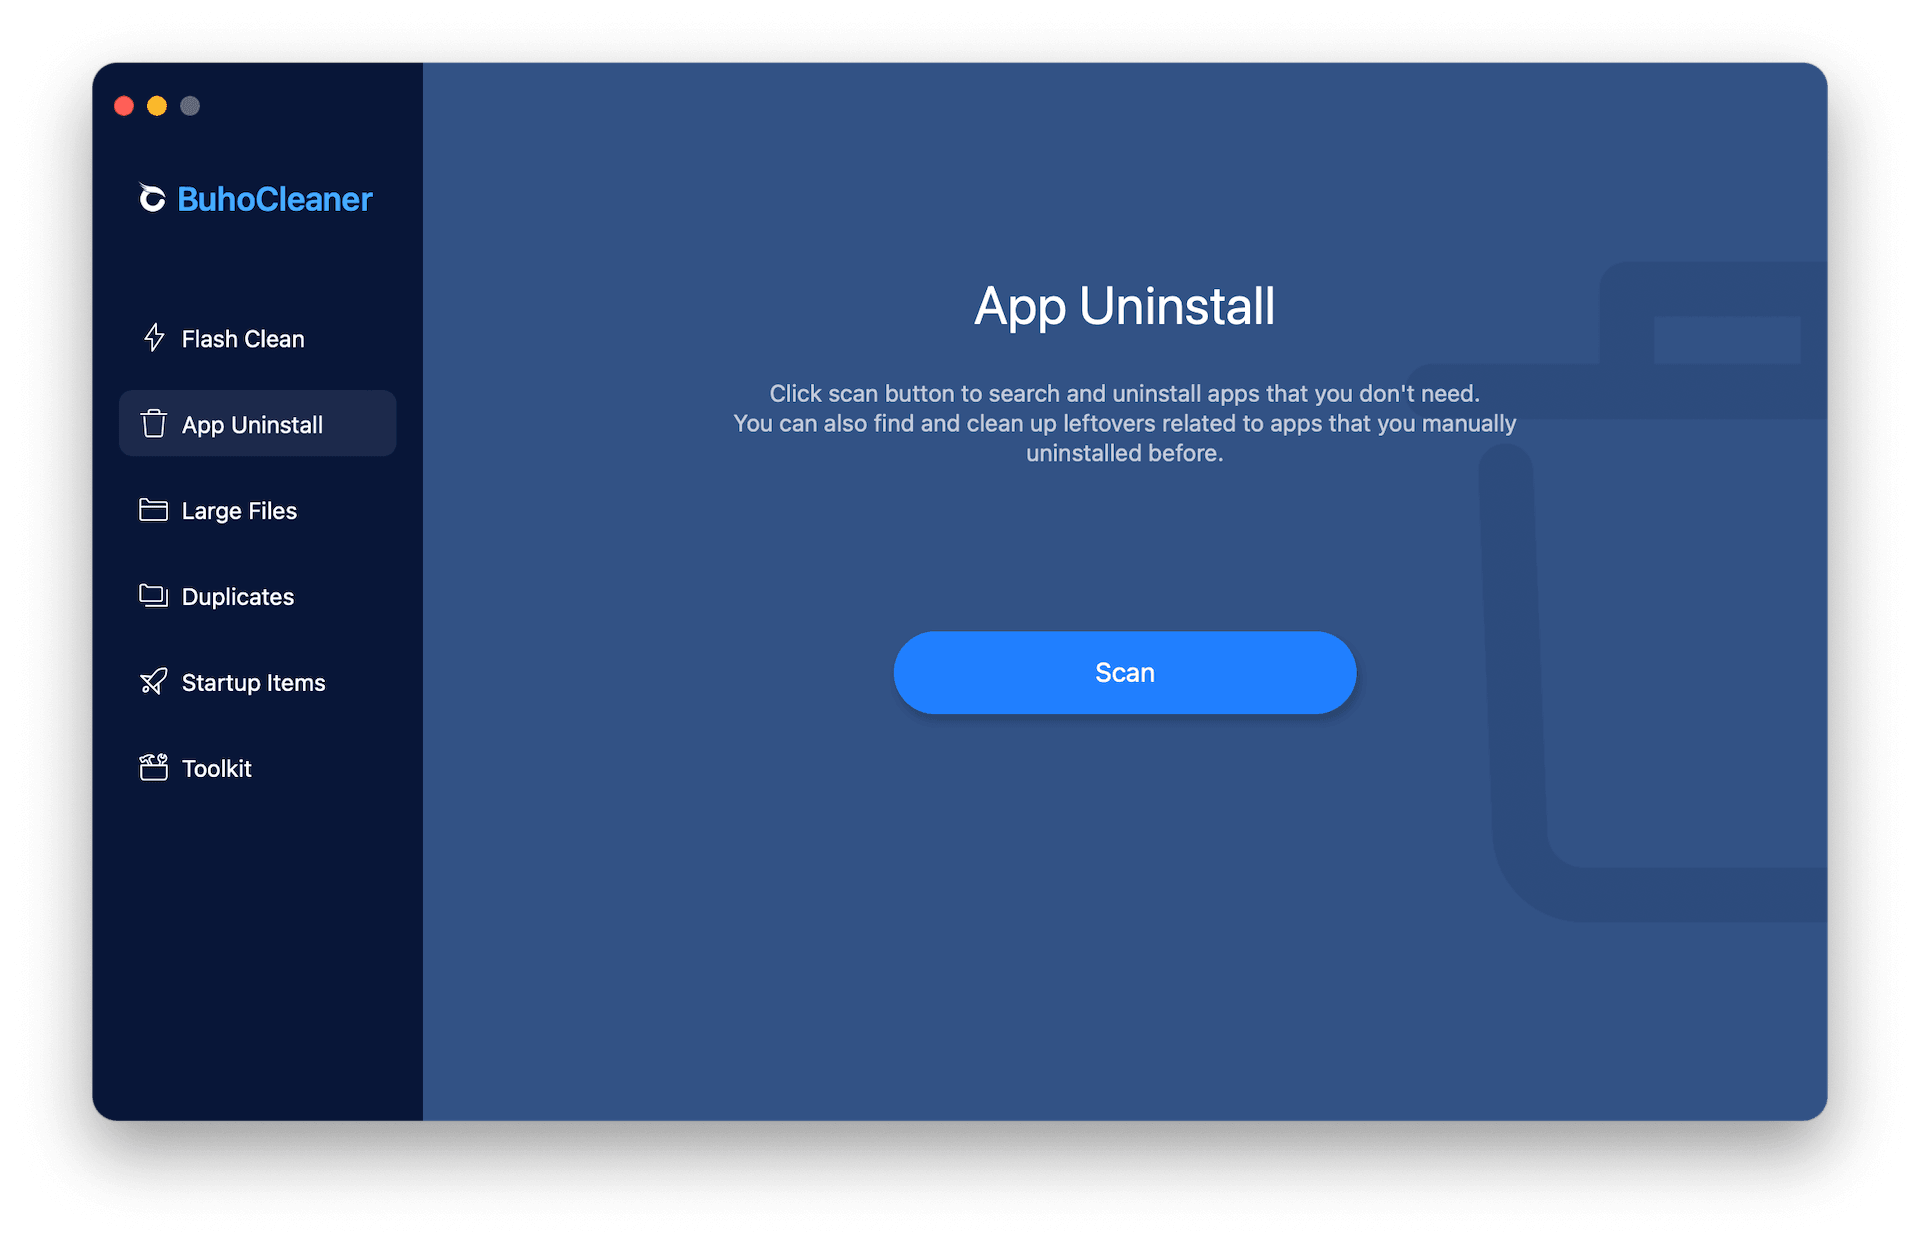 qQuickly Uninstall Apps on Mac